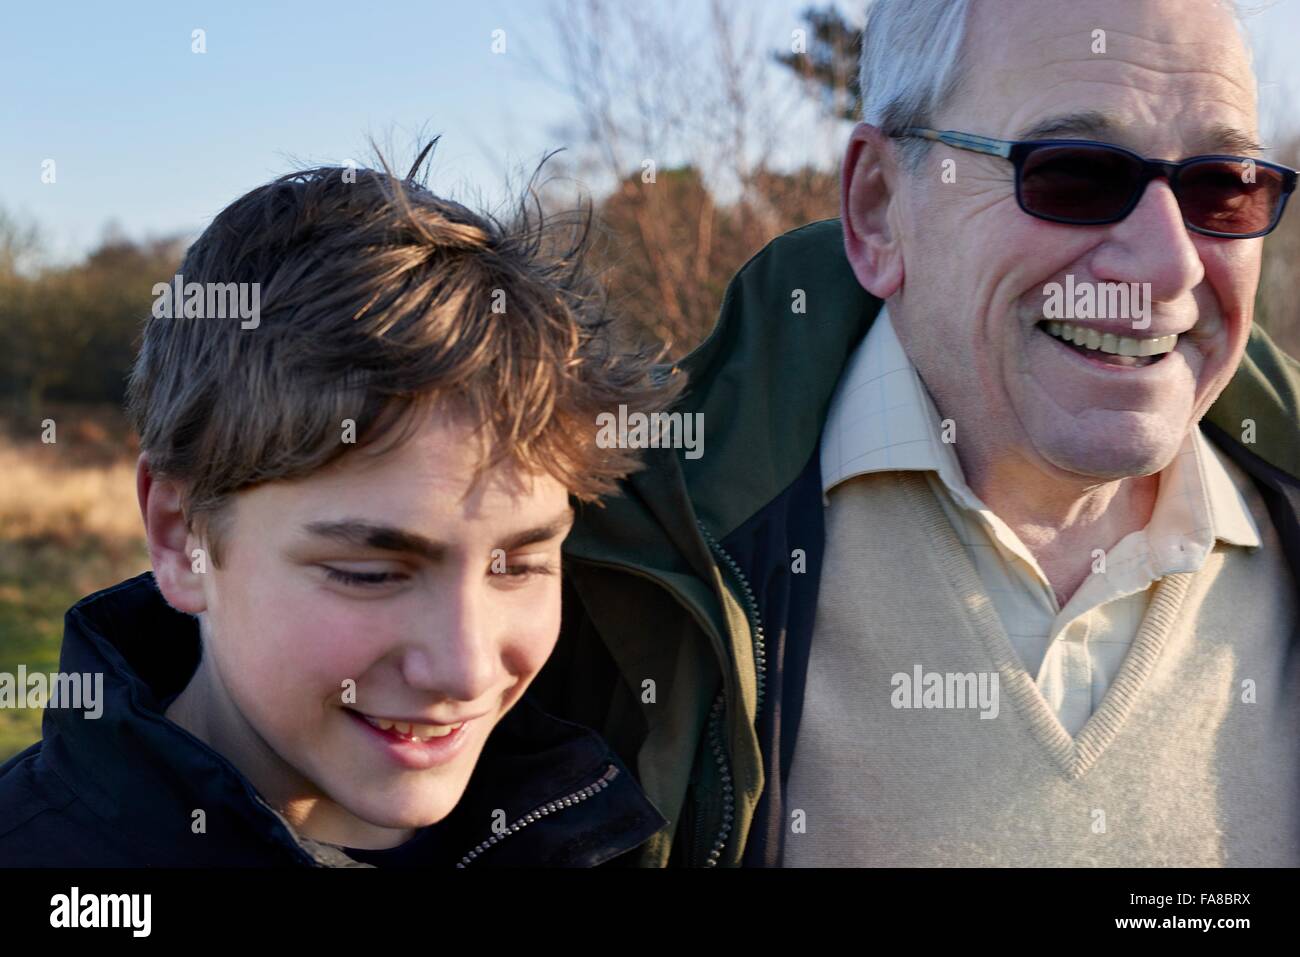 Grandfather and grandson walking through field Stock Photo